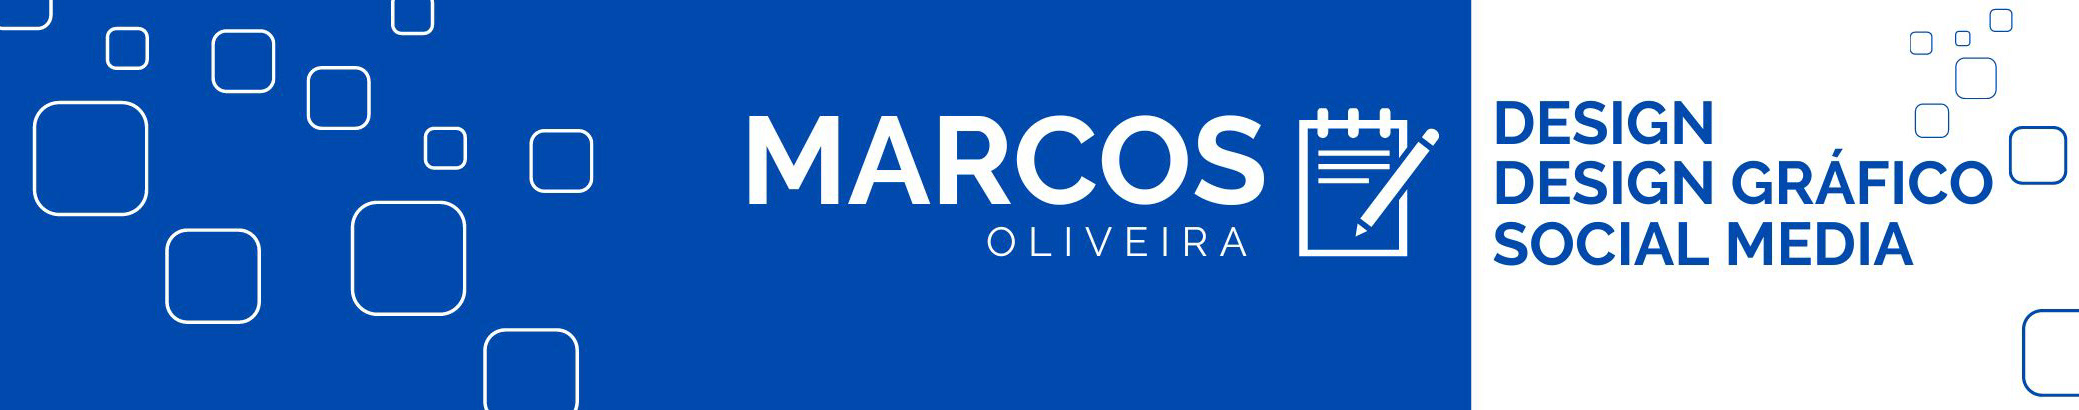 Marcos Oliveira's profile banner